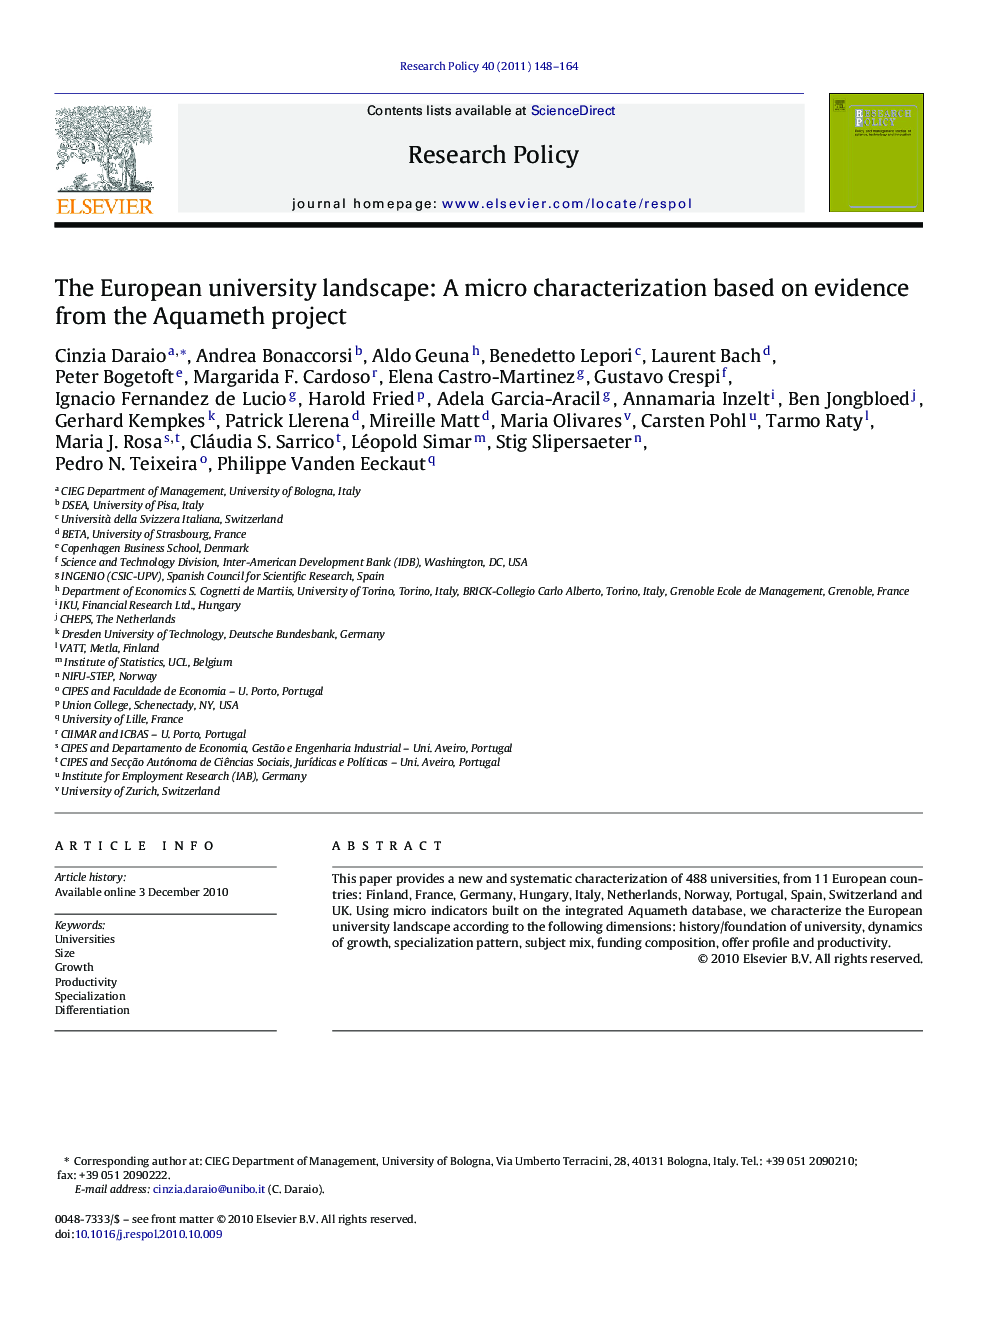 The European university landscape: A micro characterization based on evidence from the Aquameth project